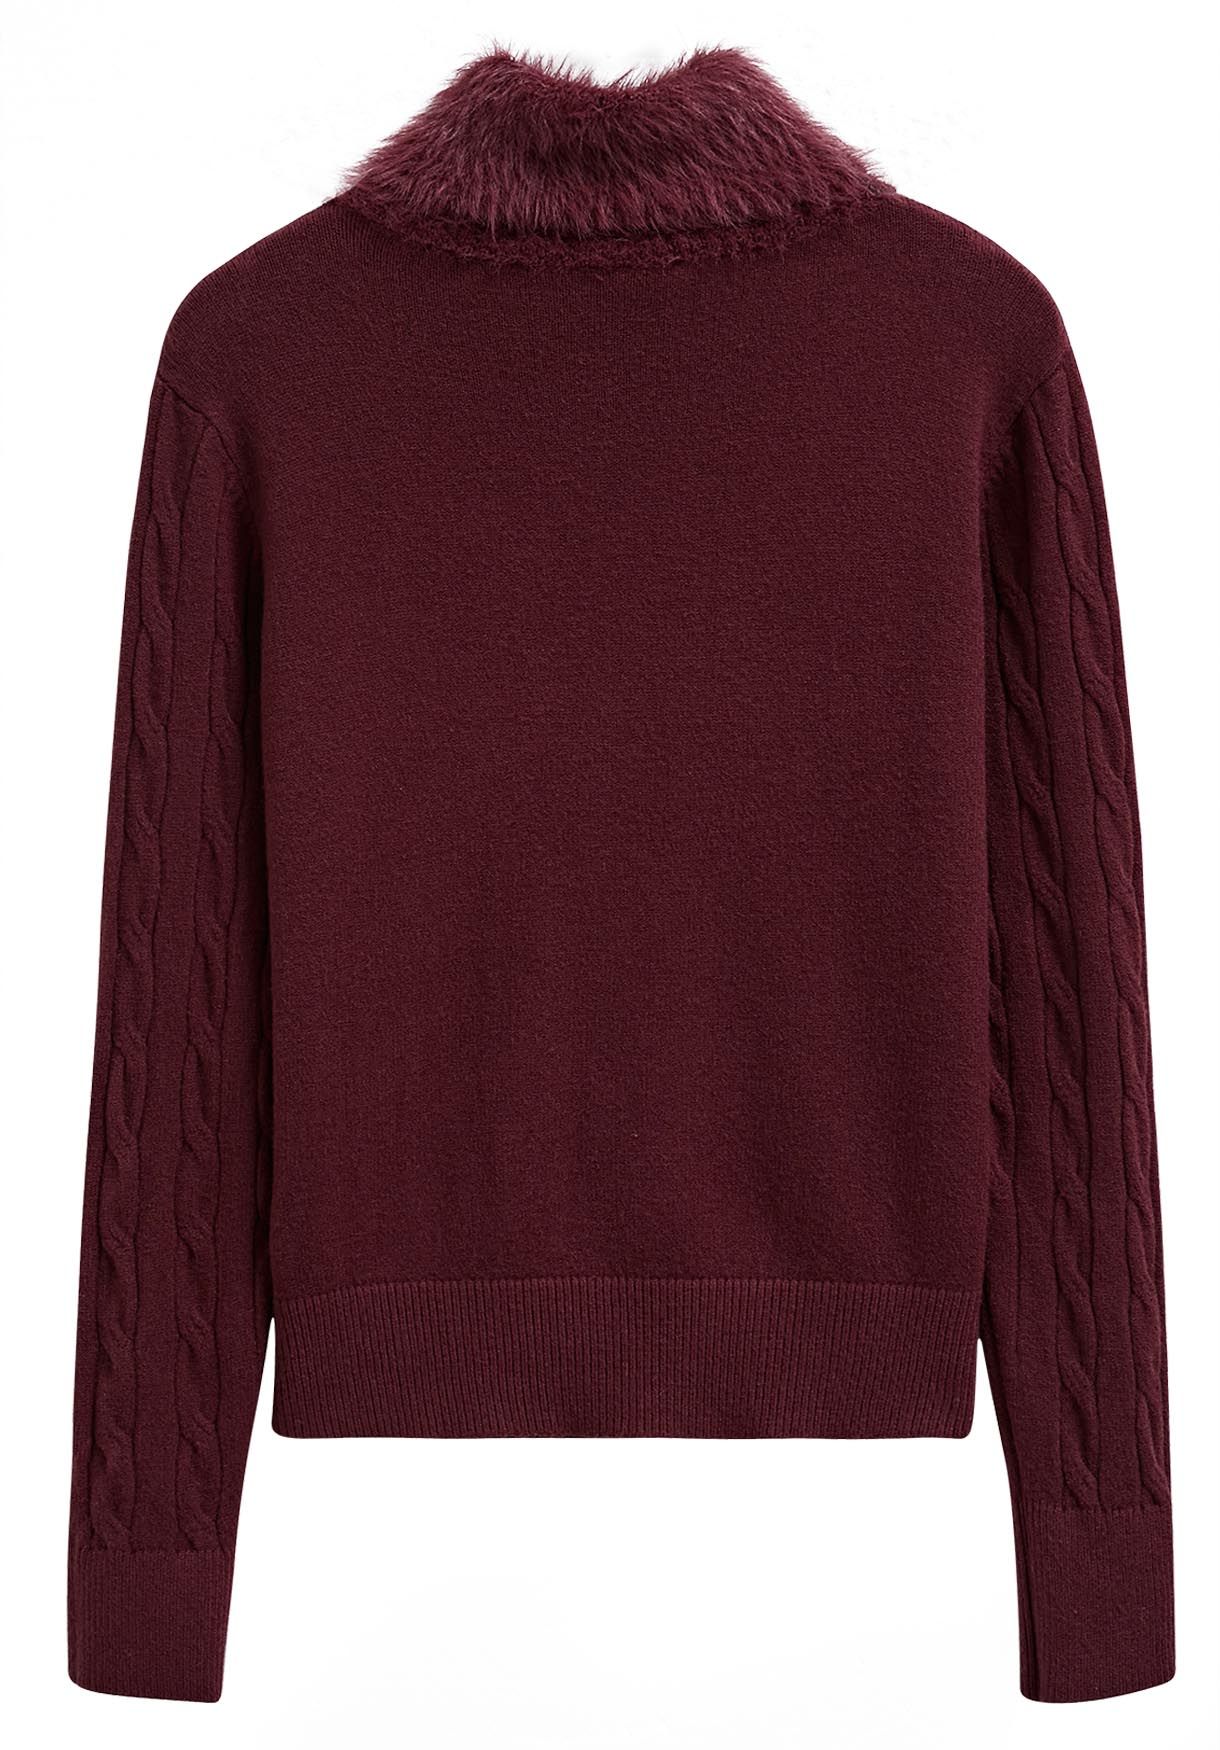 Soft Fuzzy Turtleneck Cable Knit Sweater in Burgundy - Retro, Indie and ...